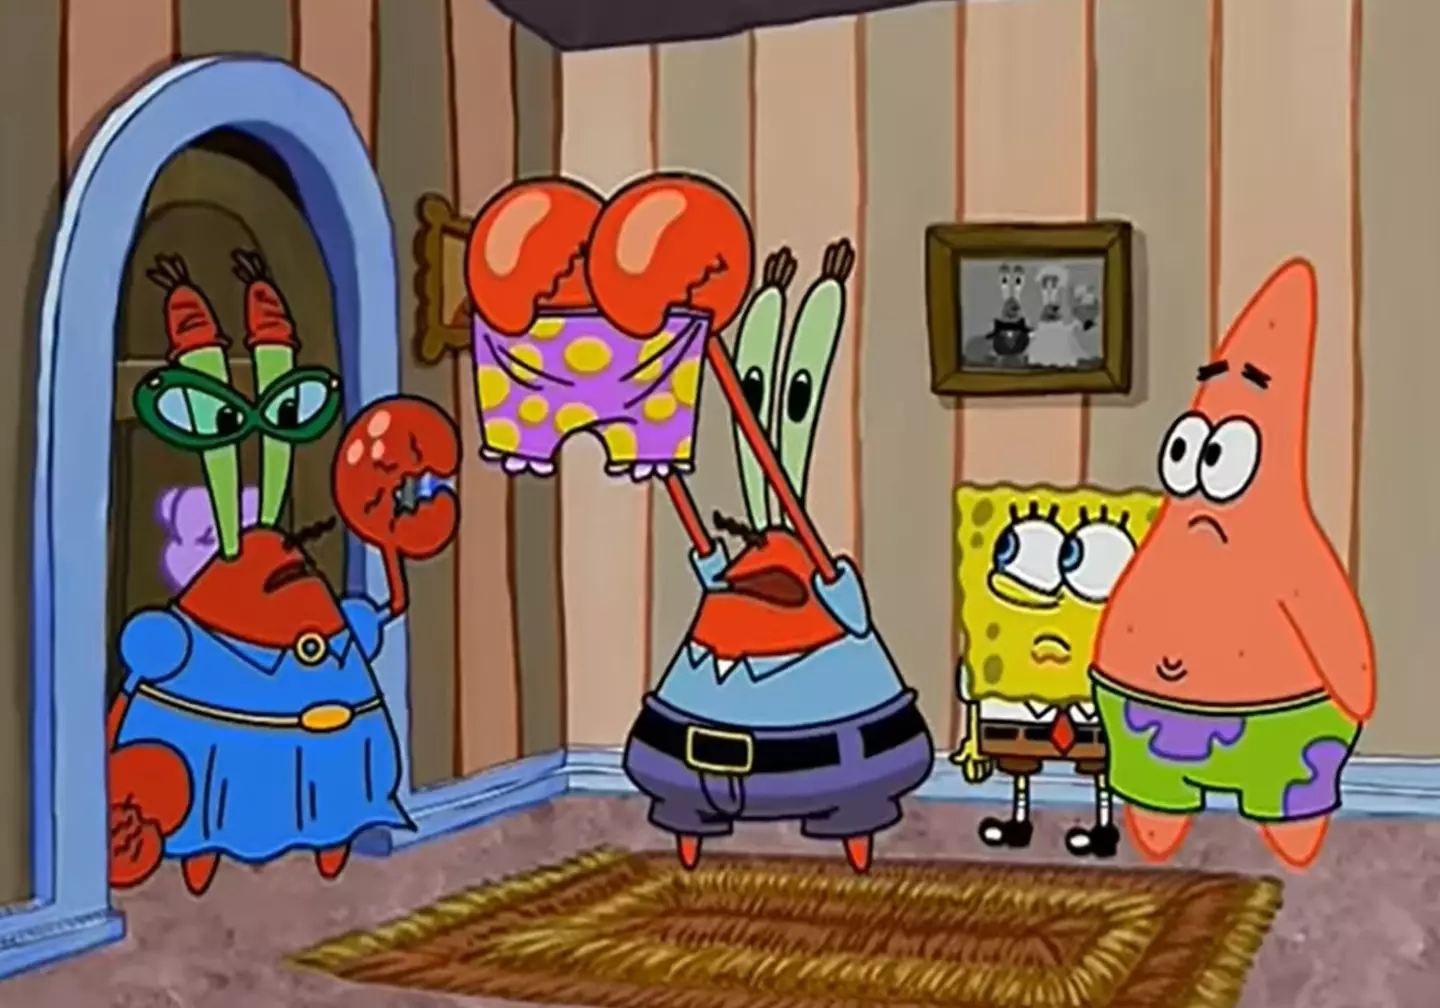 At least Mr Krabs will no longer have to explain to his mother why he's stealing her underwear.